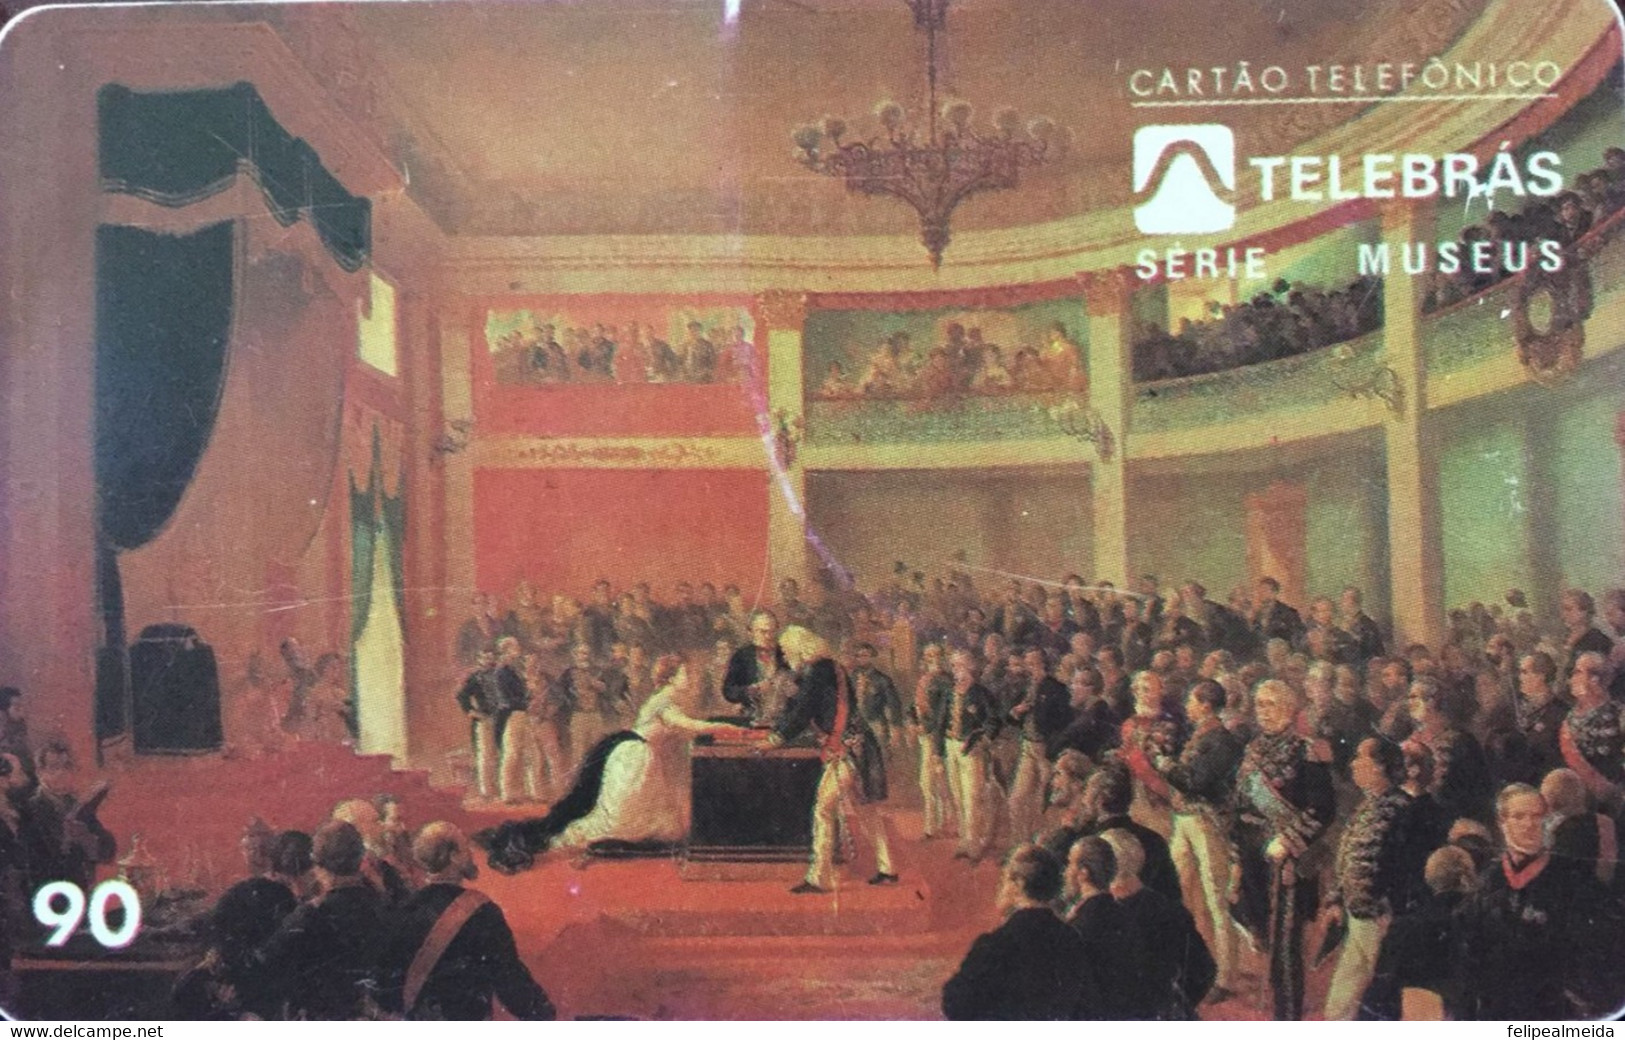 Phone Card Manufactured By Telebras In 1996 - Museum Series - Painting Oath Of Princess Isabel - Painter Victor Meirelle - Painting